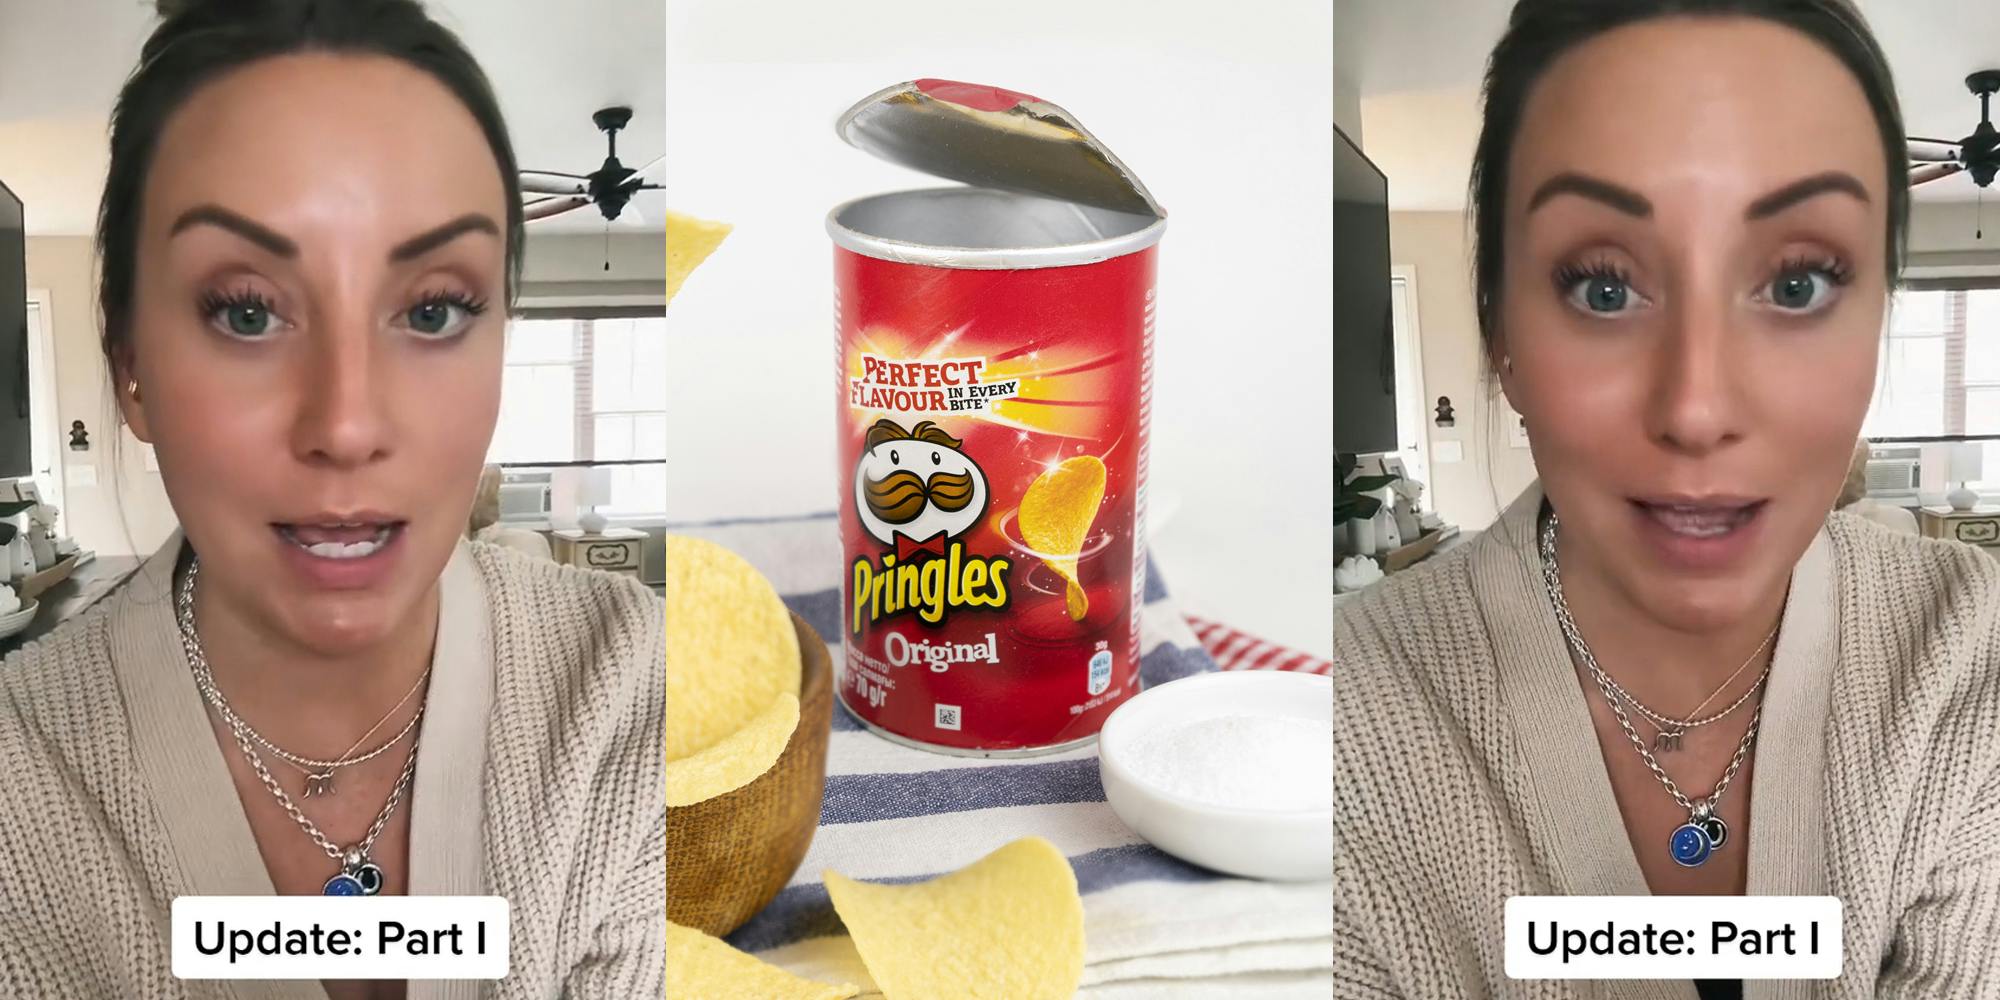 mother speaking with caption "Update: Part 1" (l) Pringles cup on stripped napkin in front of white background (c) mother speaking with caption "Update: Part 1" (r)